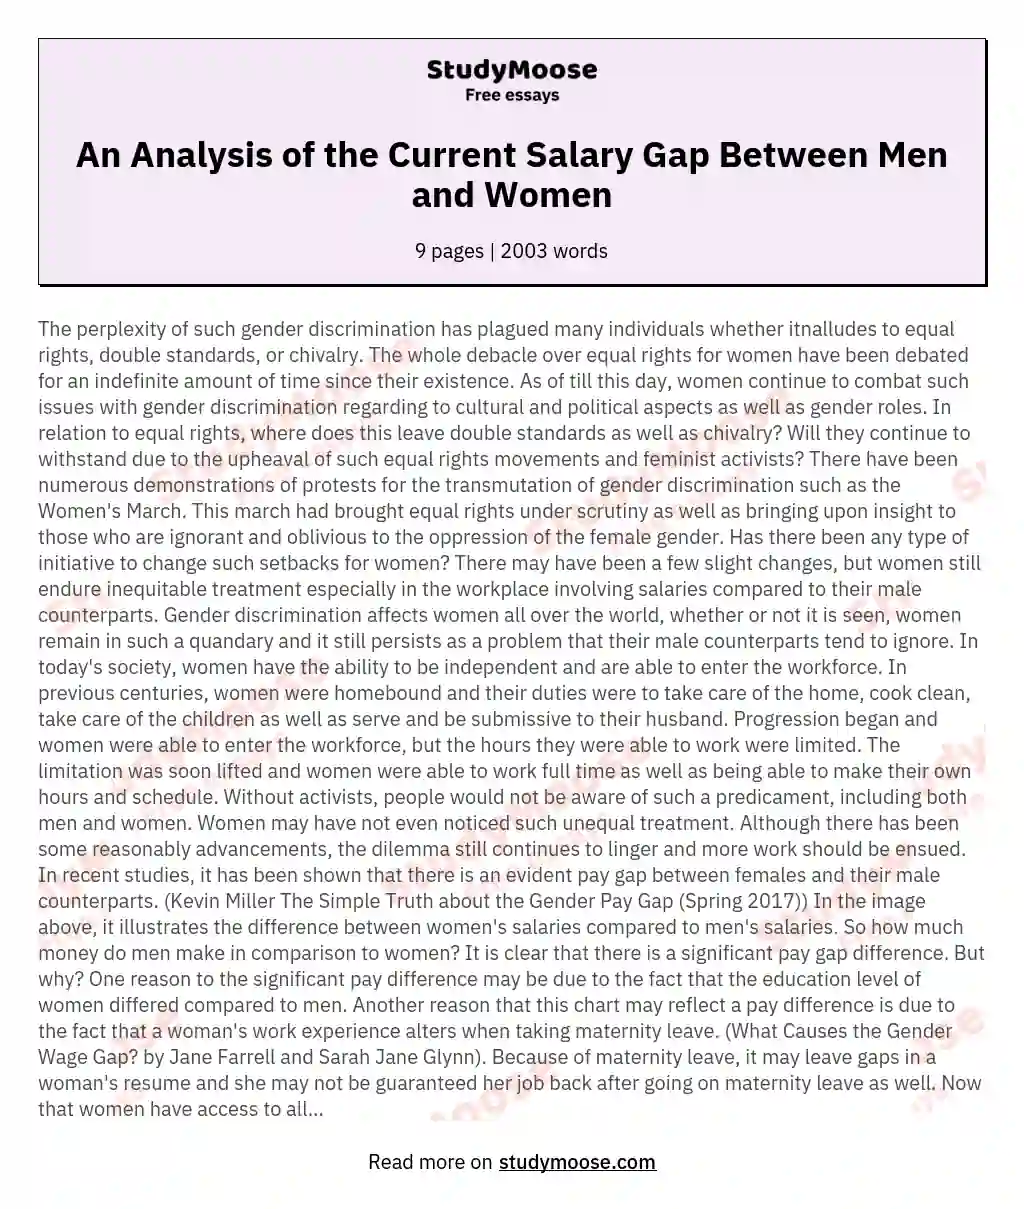 An Analysis of the Current Salary Gap Between Men and Women essay